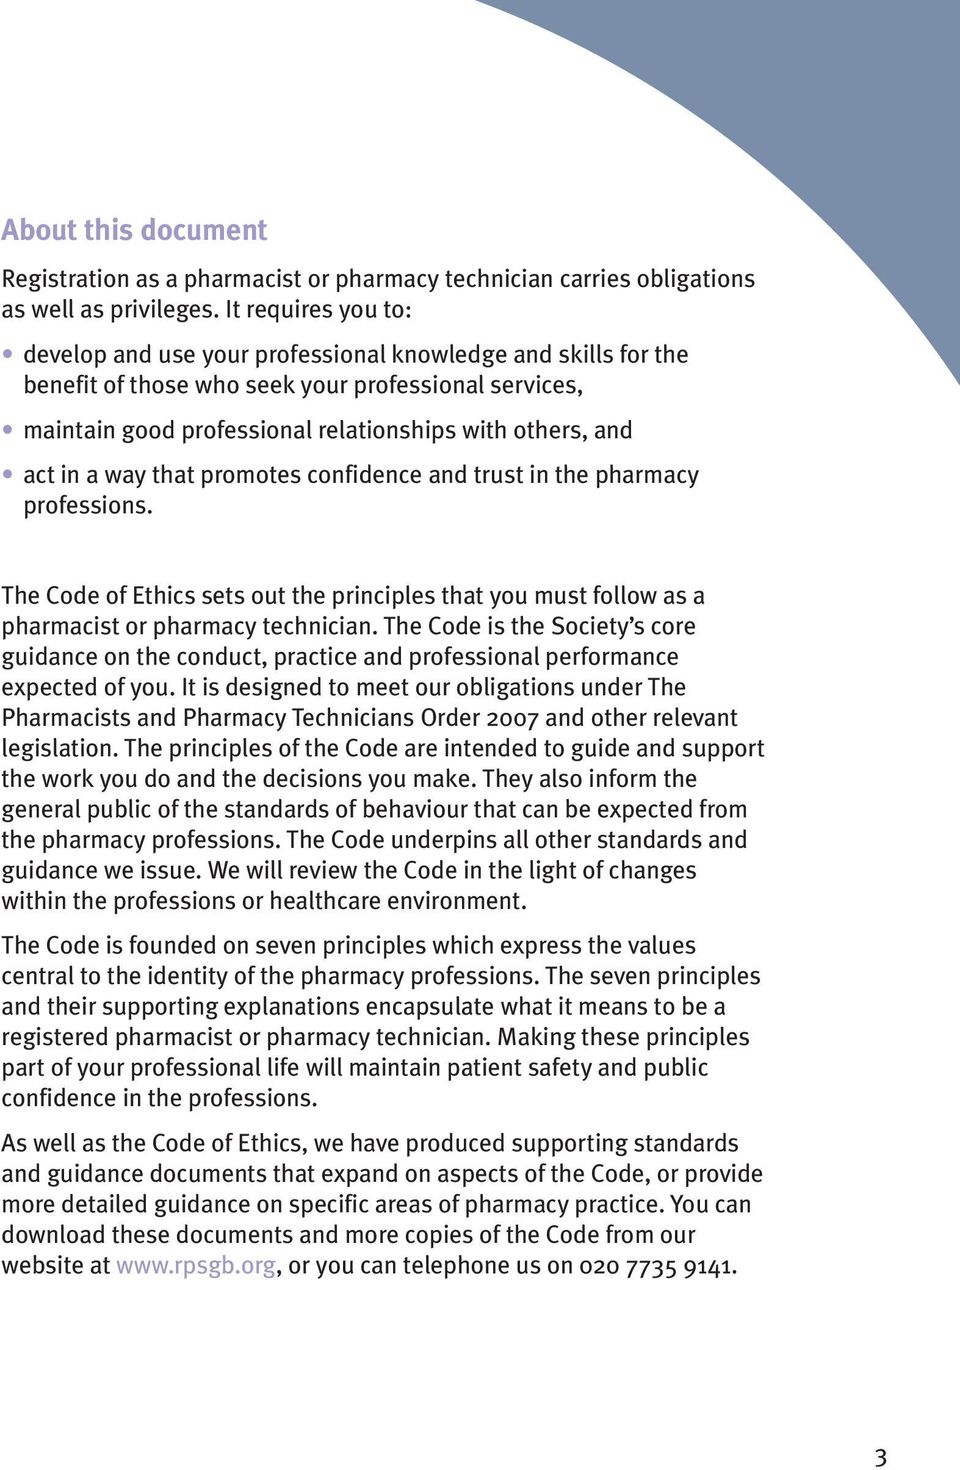 in a way that promotes confidence and trust in the pharmacy professions. The Code of Ethics sets out the principles that you must follow as a pharmacist or pharmacy technician.